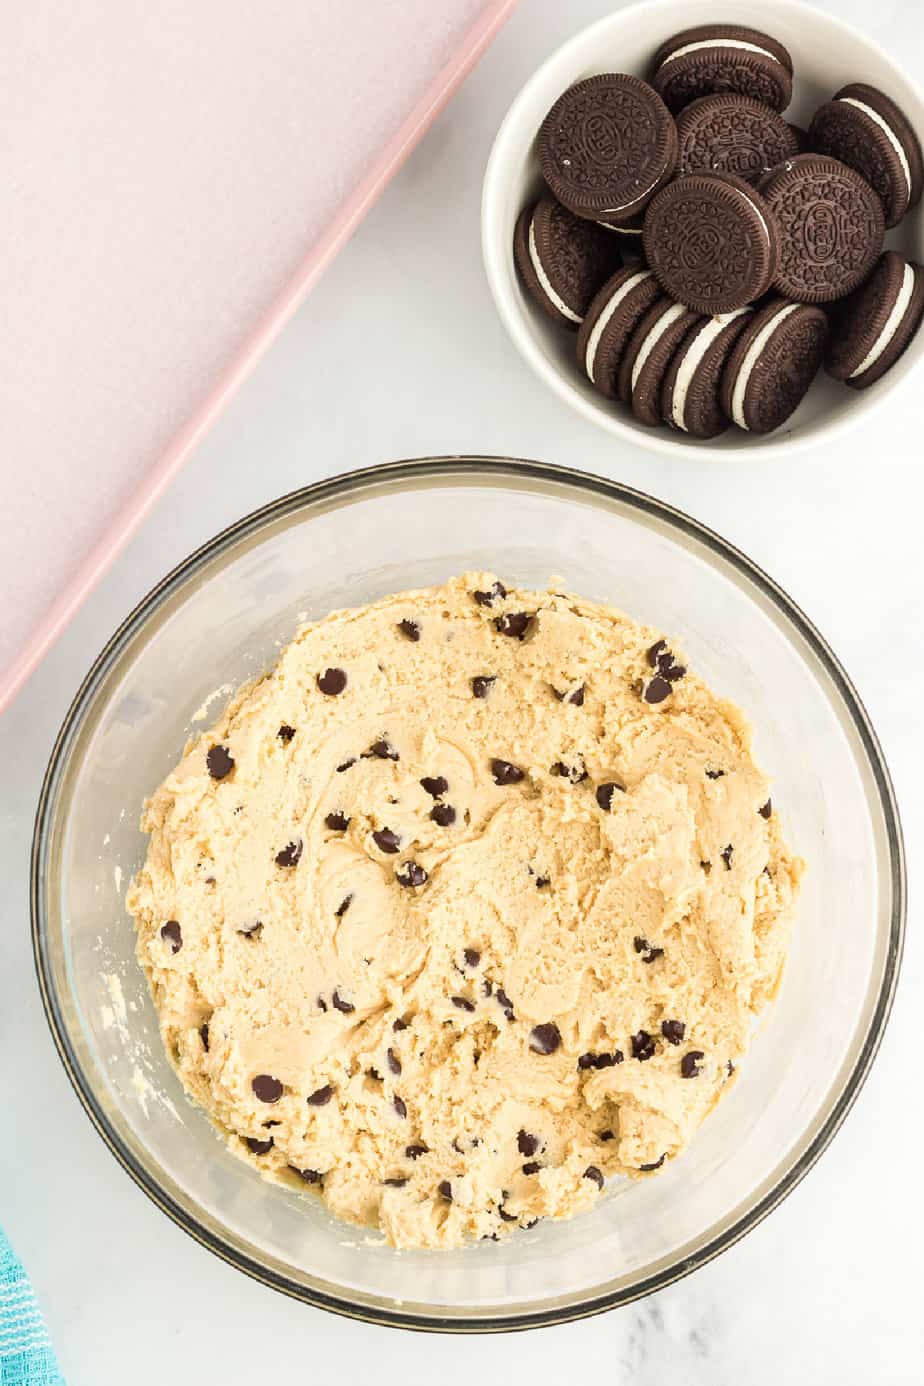 Cookie dough mixed with chocolate chips in a large bowl on a counter from overhead with a bowl of oreos and a pink baking sheet on the counter nearby.